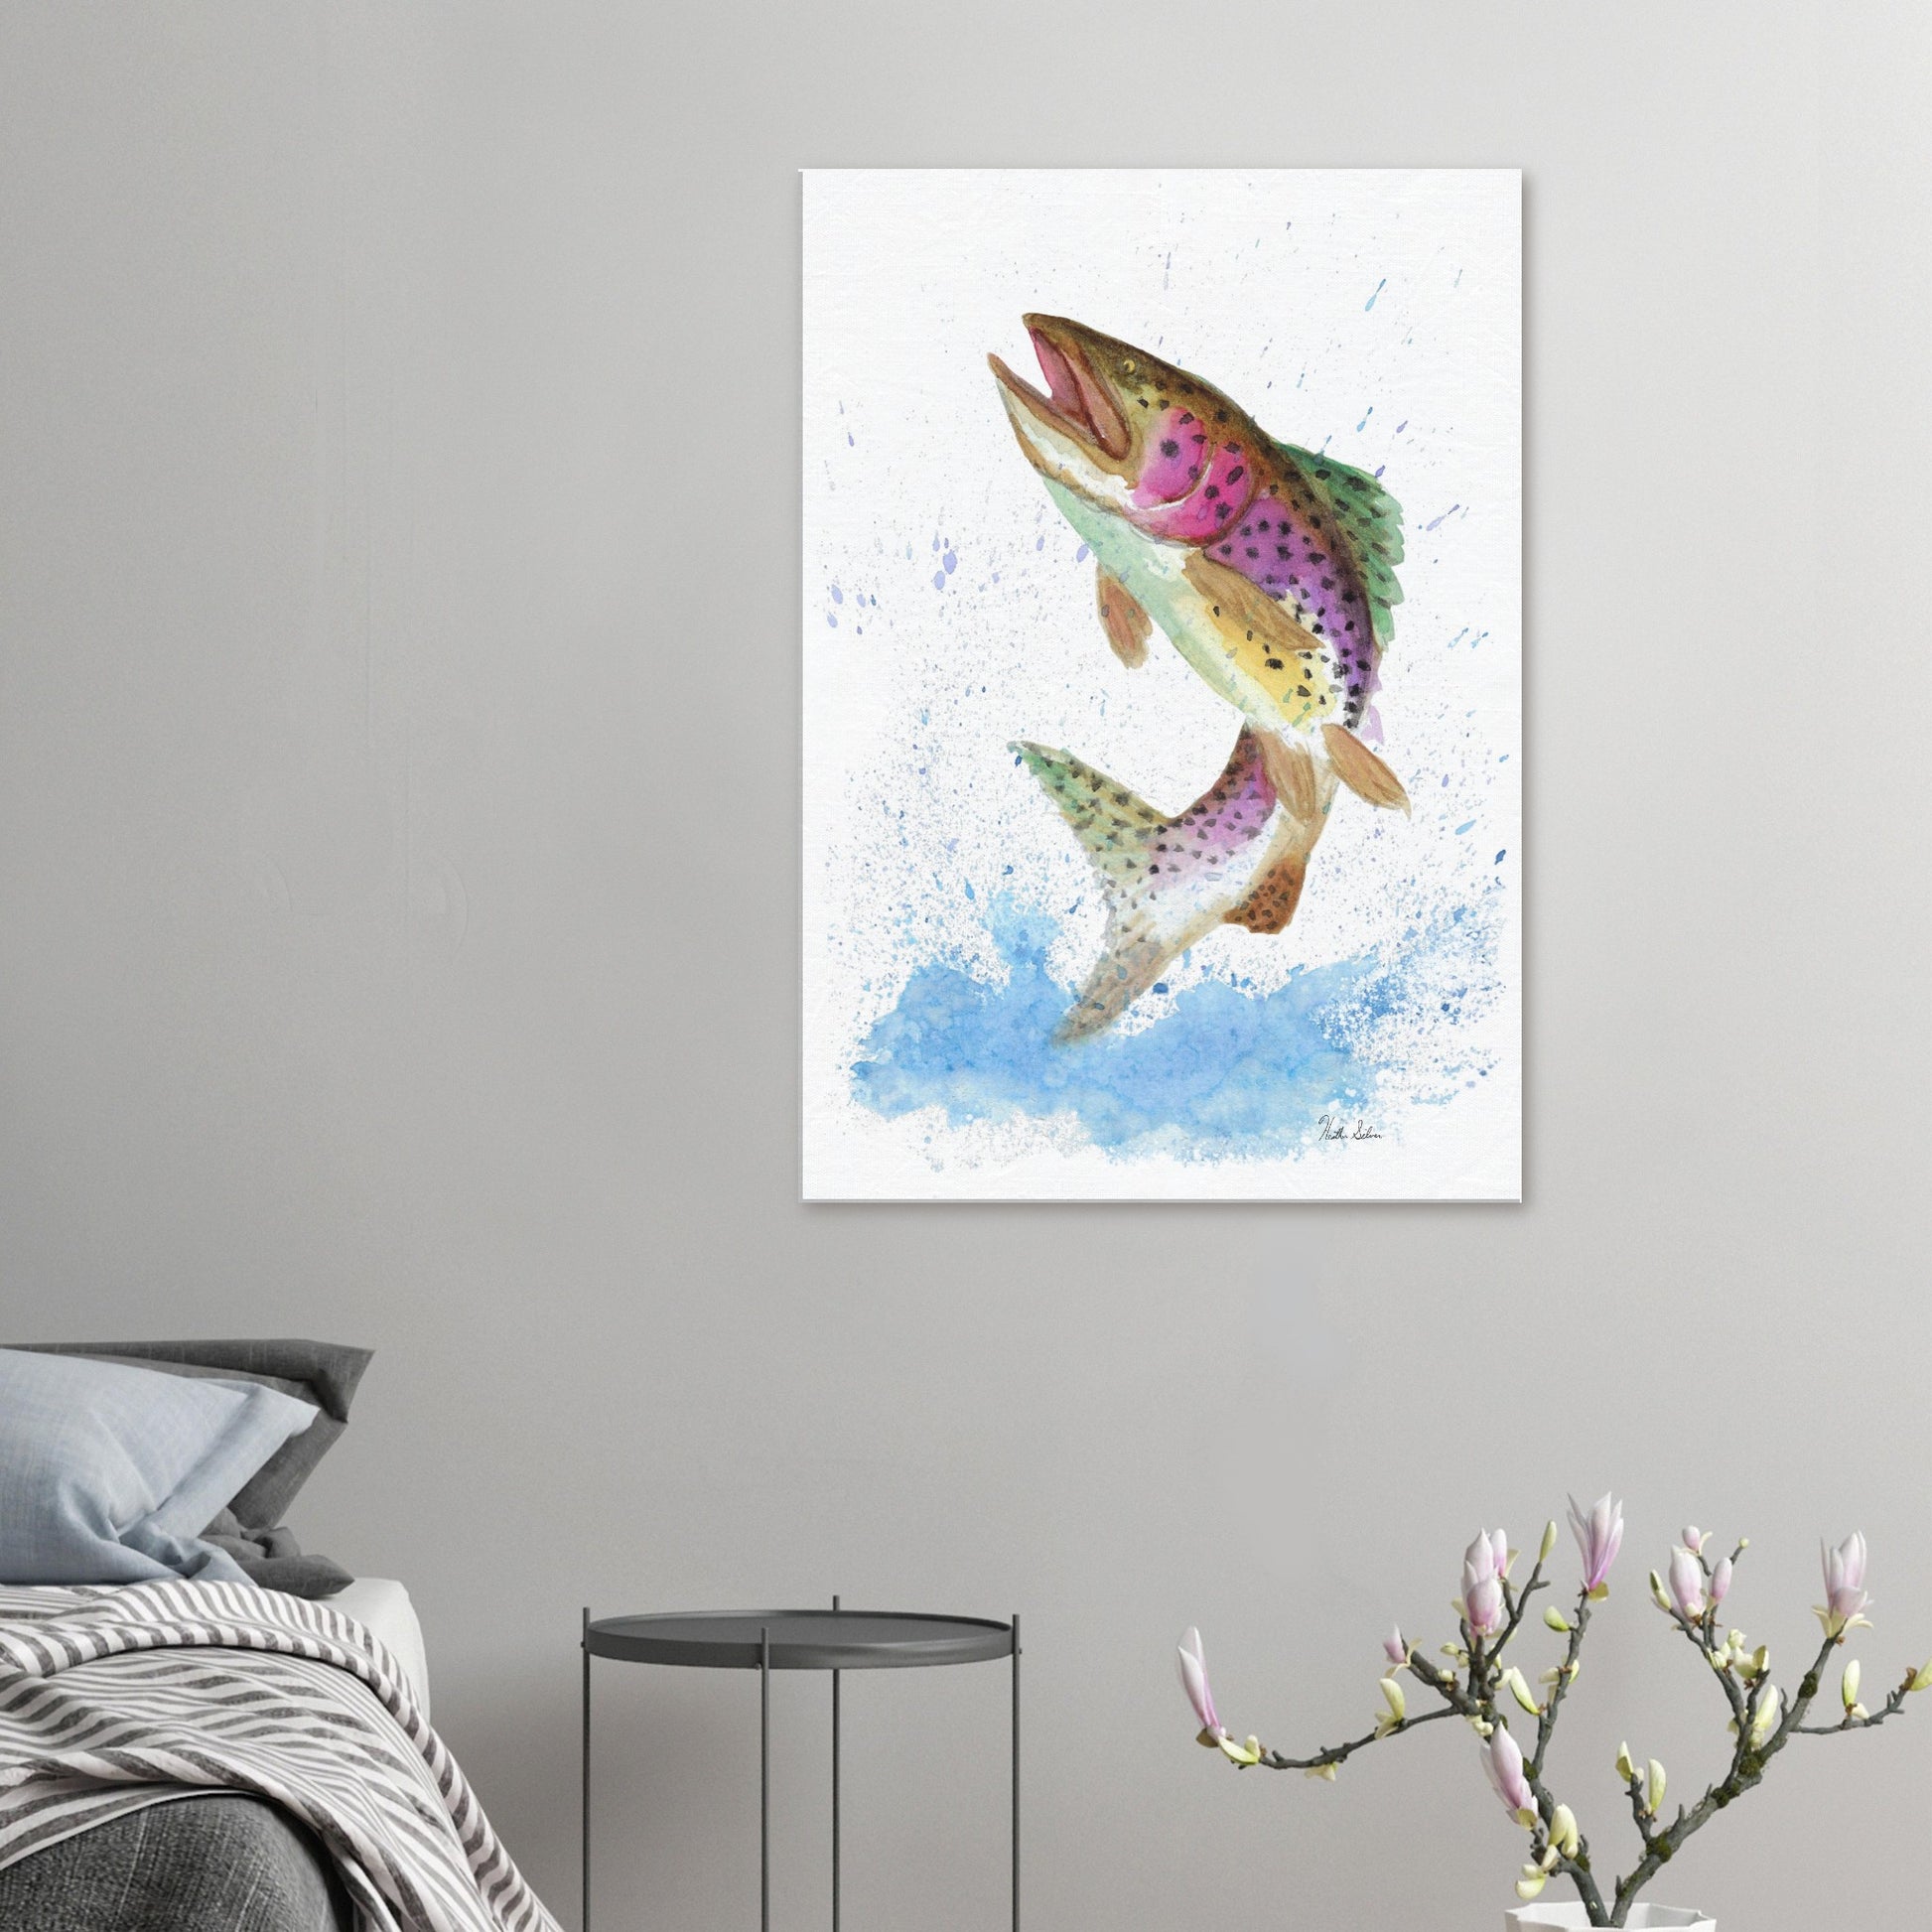 28 by 40 inch slim canvas wall art print featuring a watercolor painting of a rainbow trout leaping from the water. Shown on wall above grey bed, grey nightstand, and blooming branch decor.